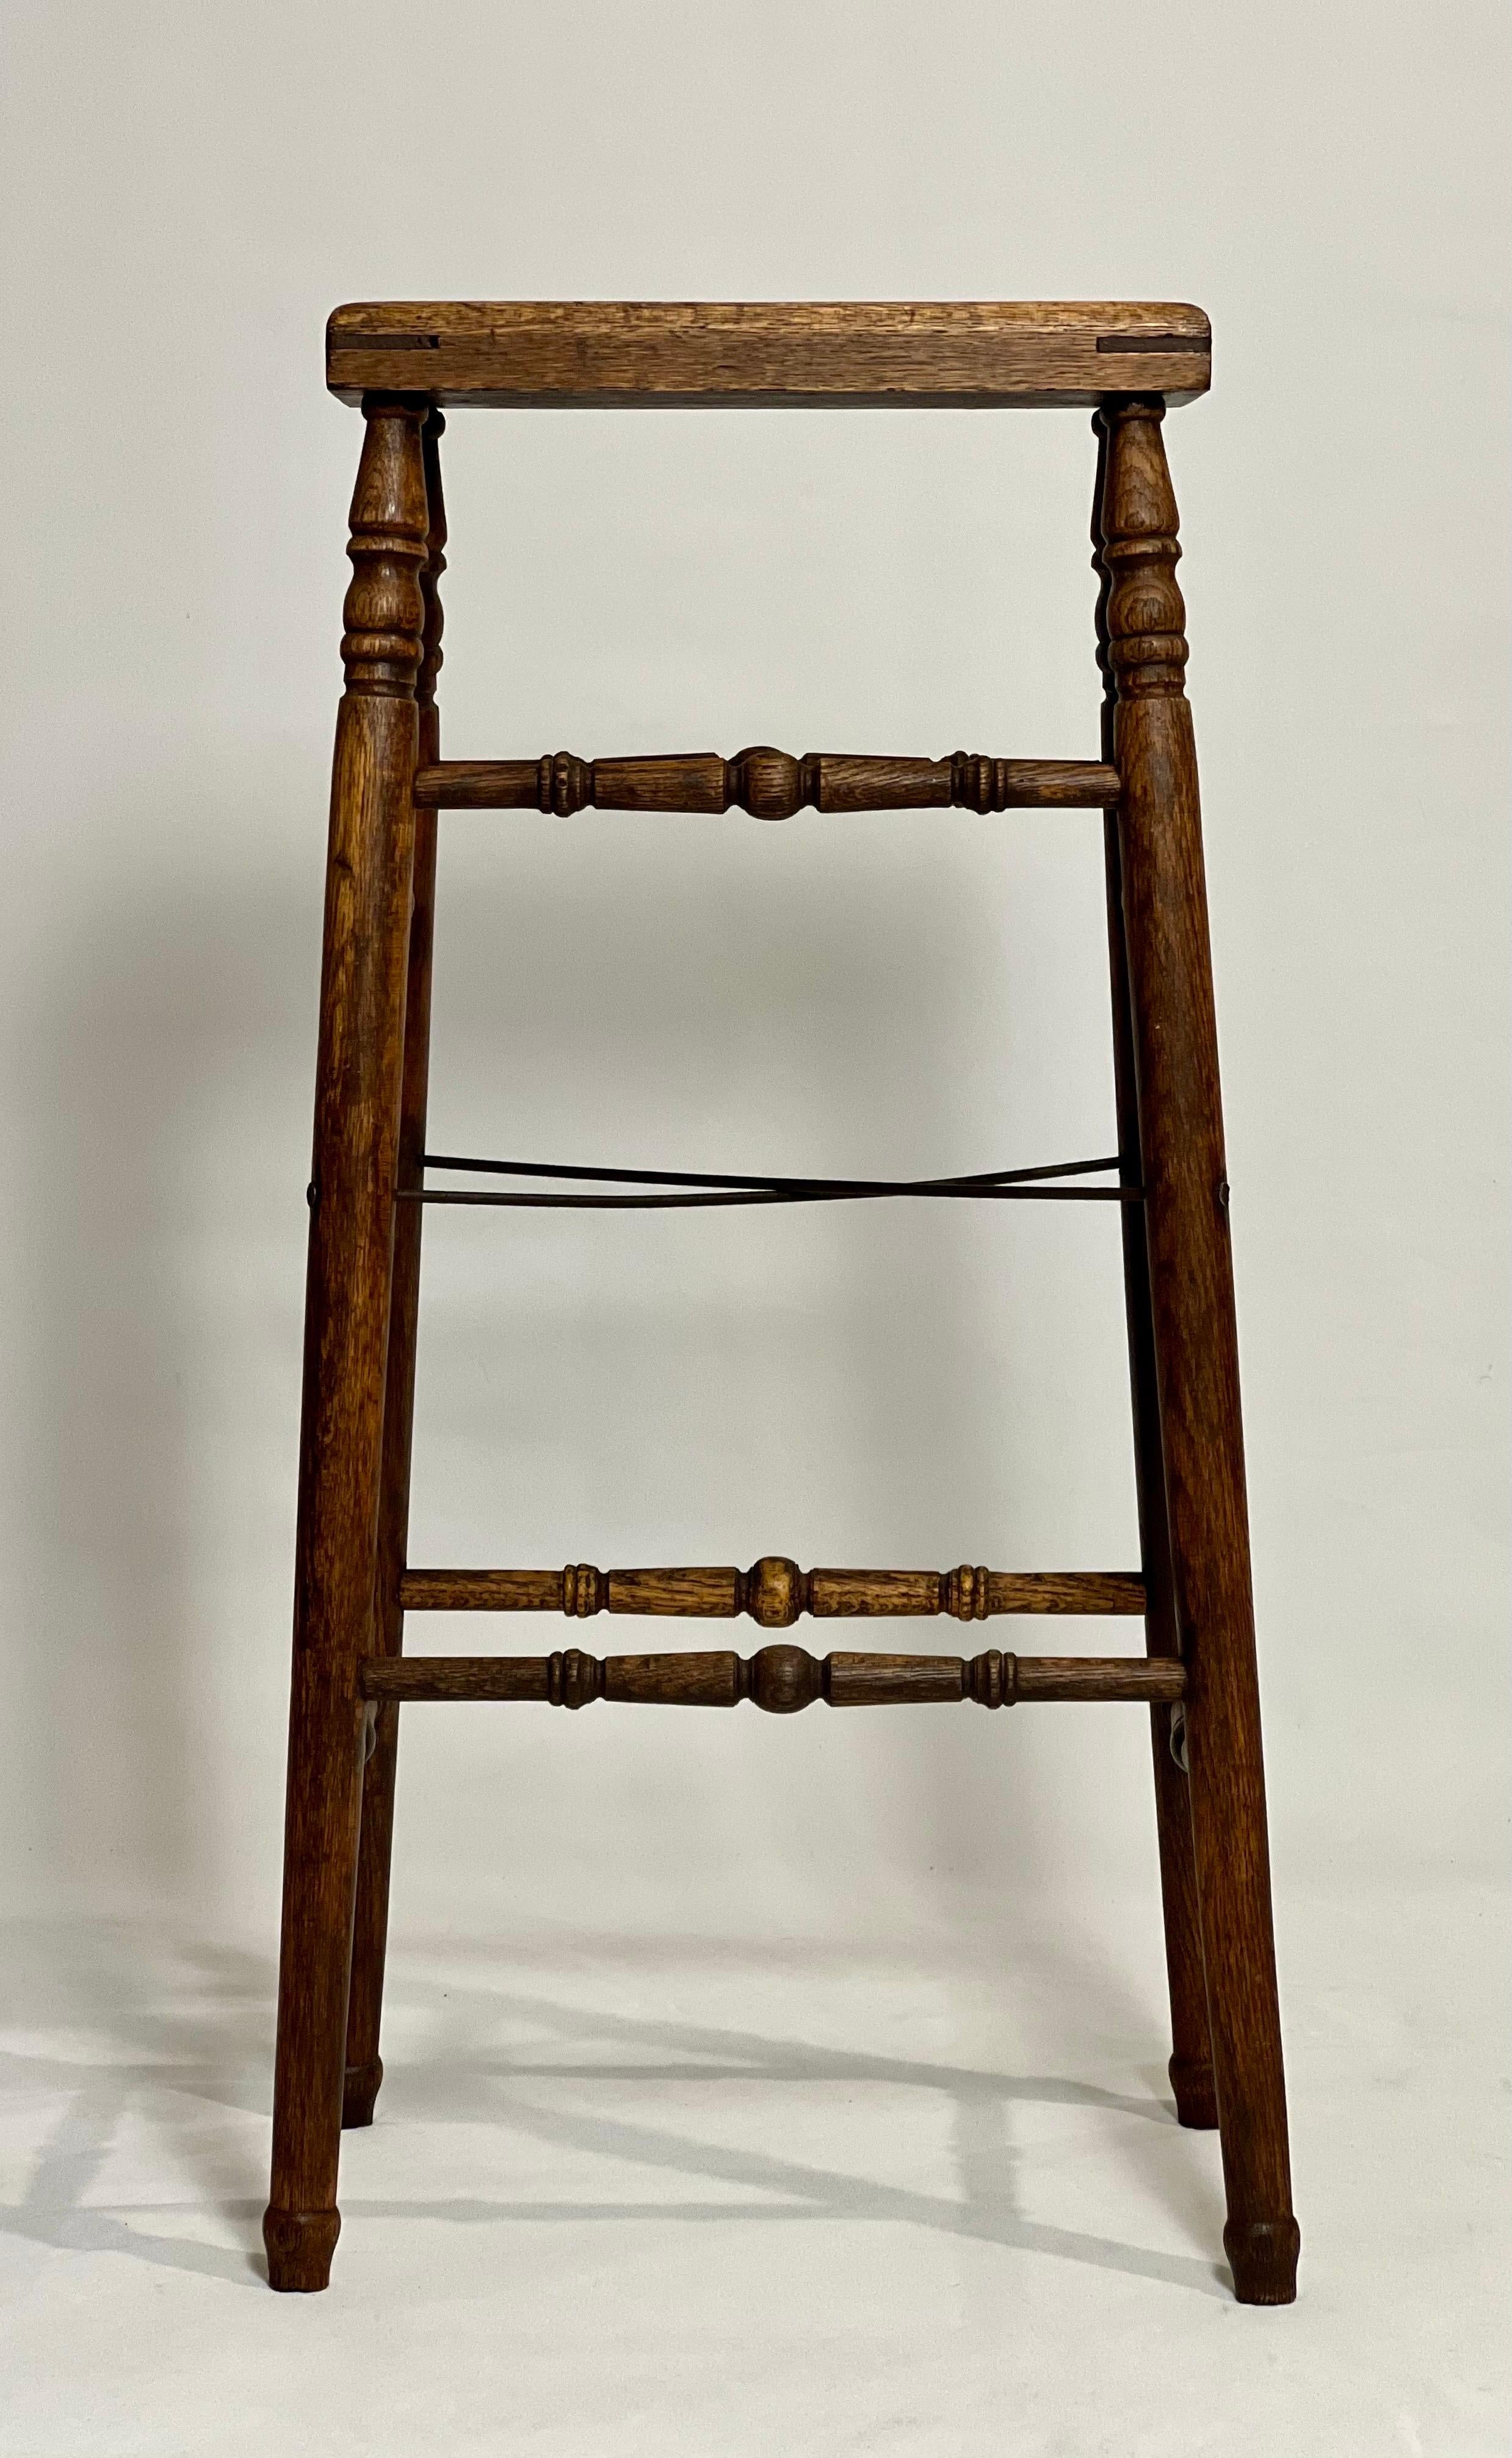 19th Century French Turned Oak and Iron Artist's Stand or Stool In Good Condition For Sale In Doylestown, PA